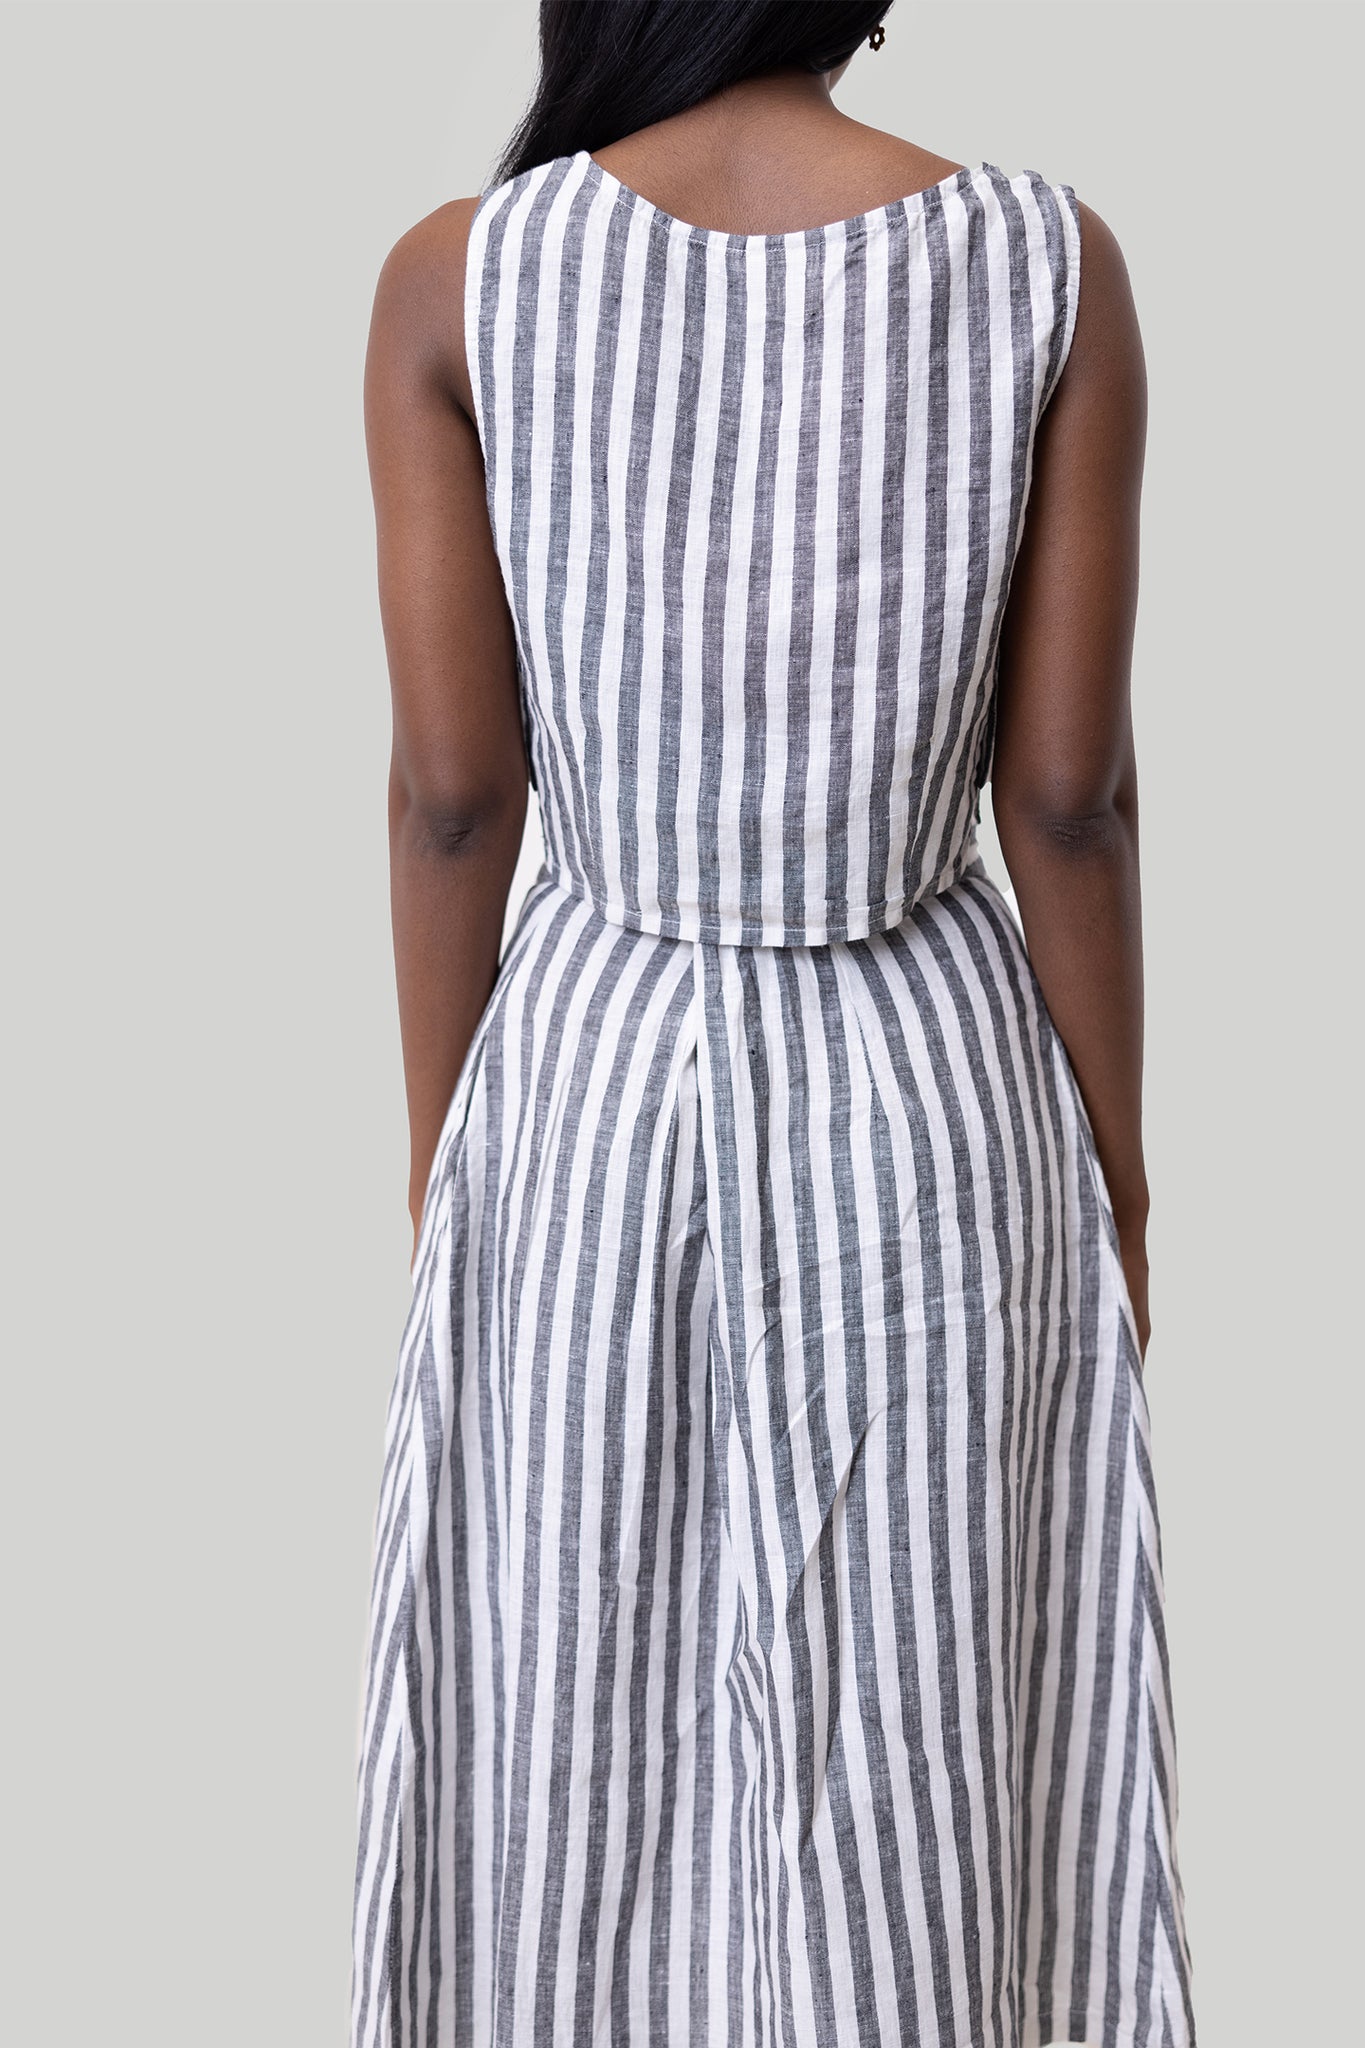 Boxy Crop Top in Linen Stripes